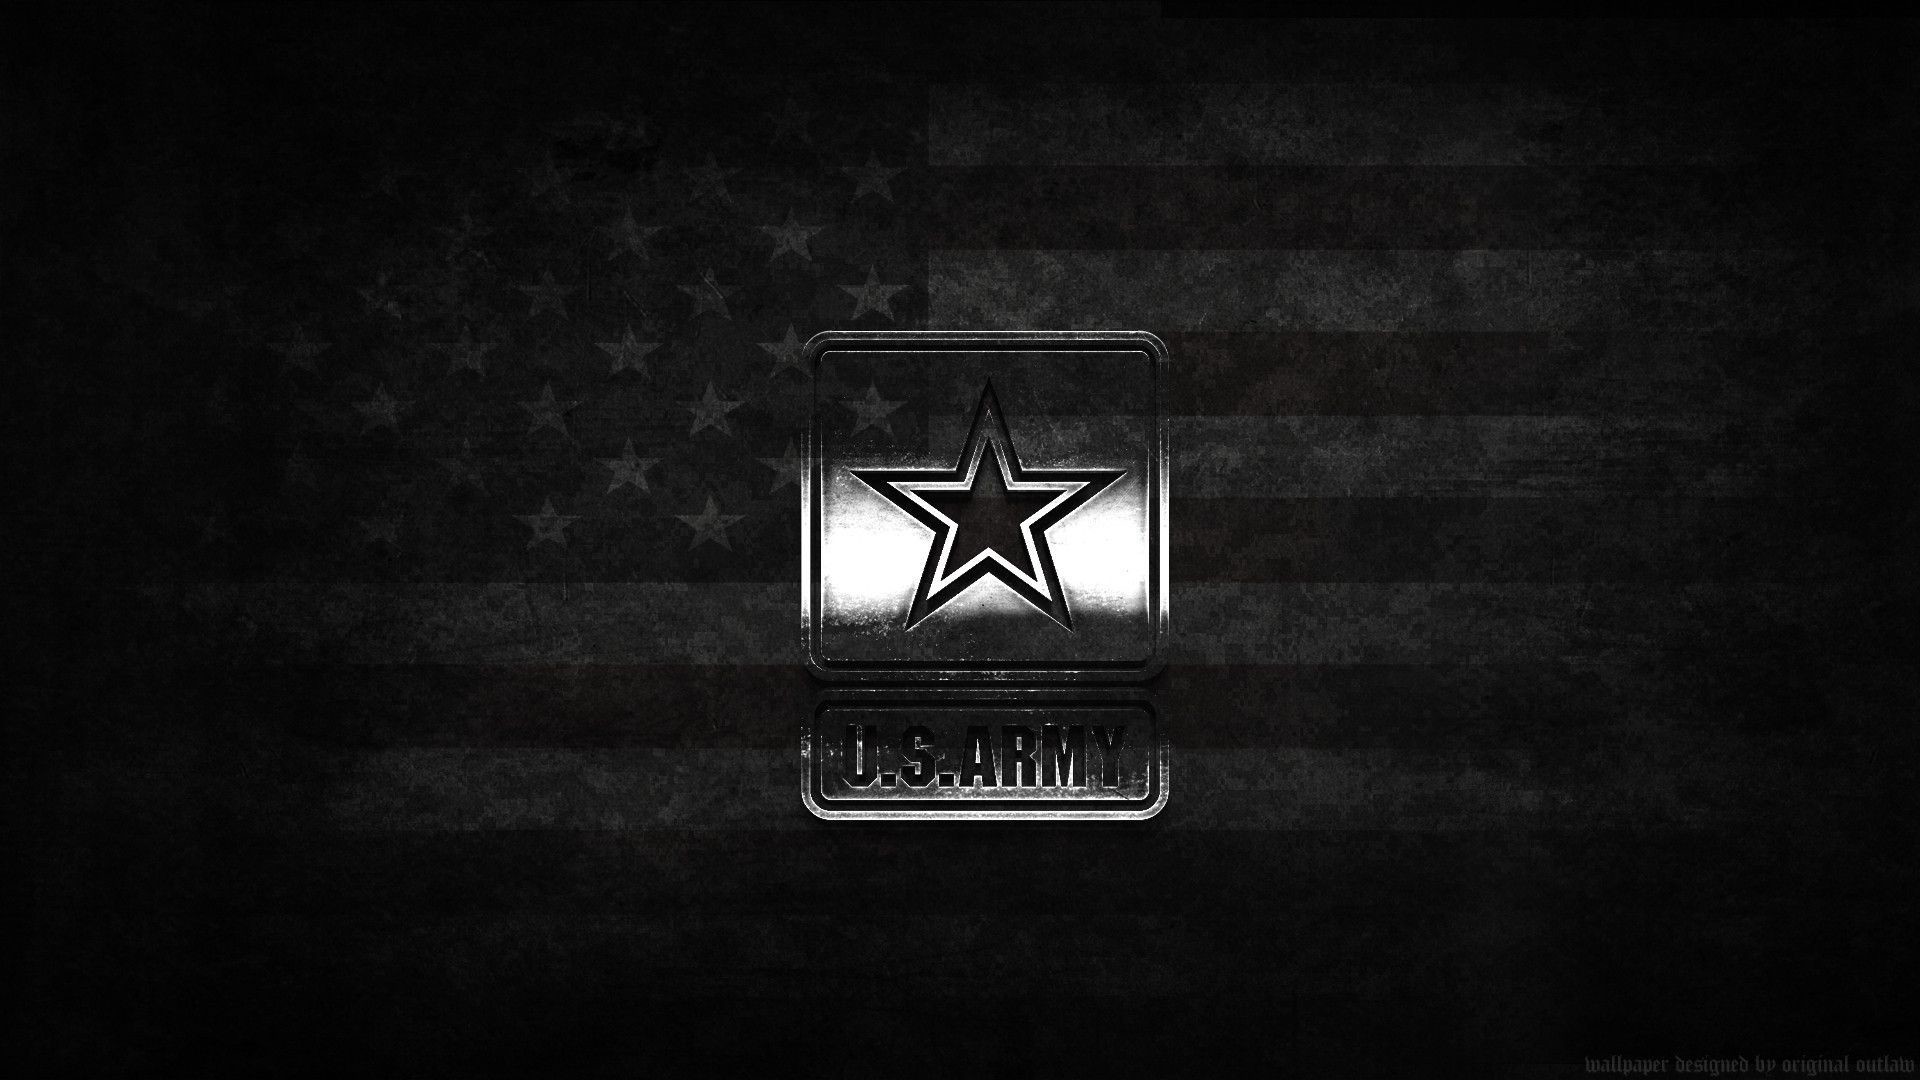 1920x1080 US Army Logo Wallpapers Wallpapers) – Adorable Wallpapers